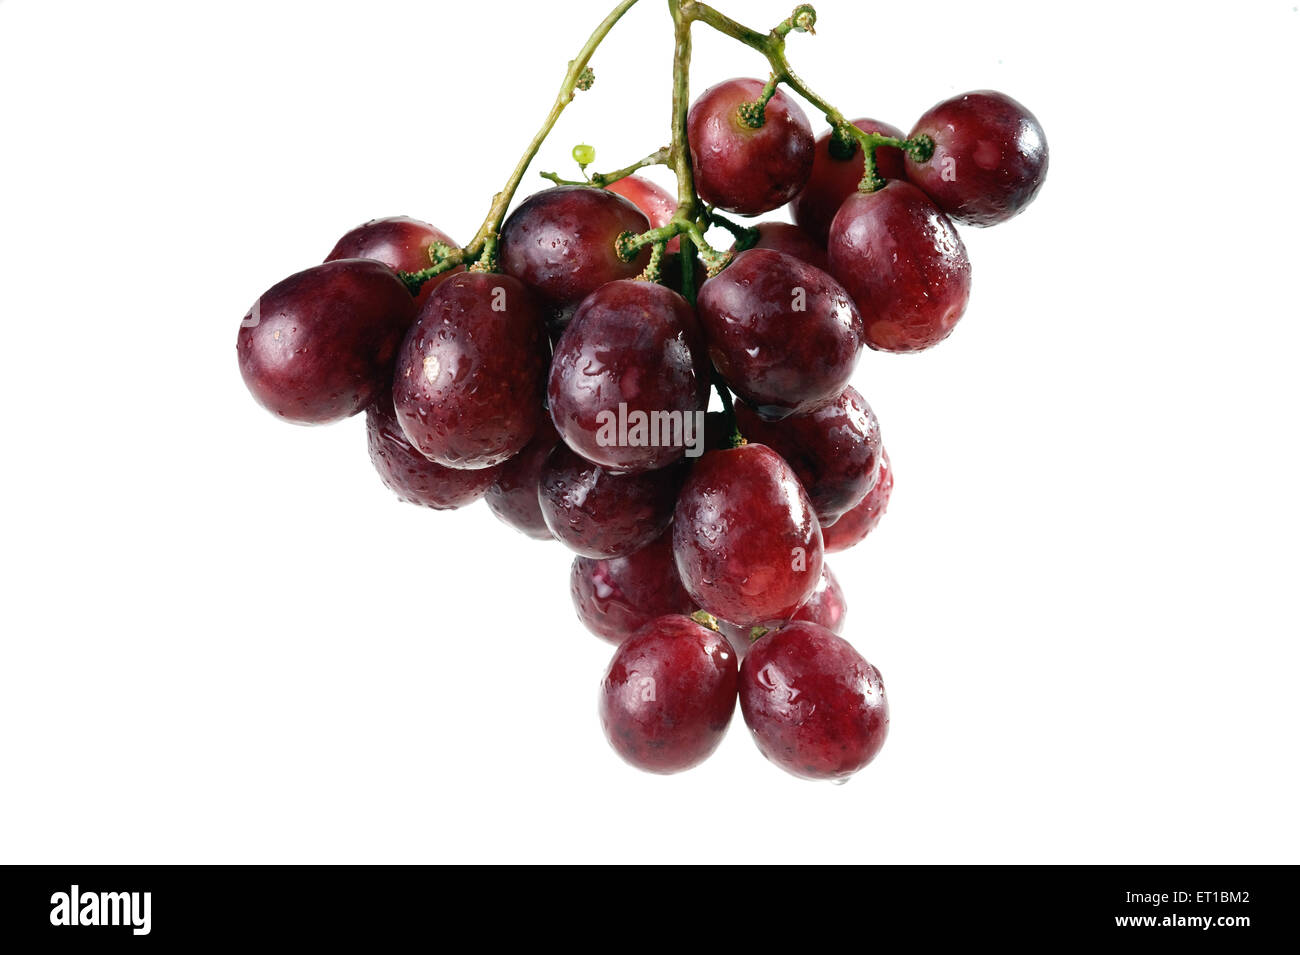 water drops on bunch of red grapes fruit on white background saf 168342 Stock Photo